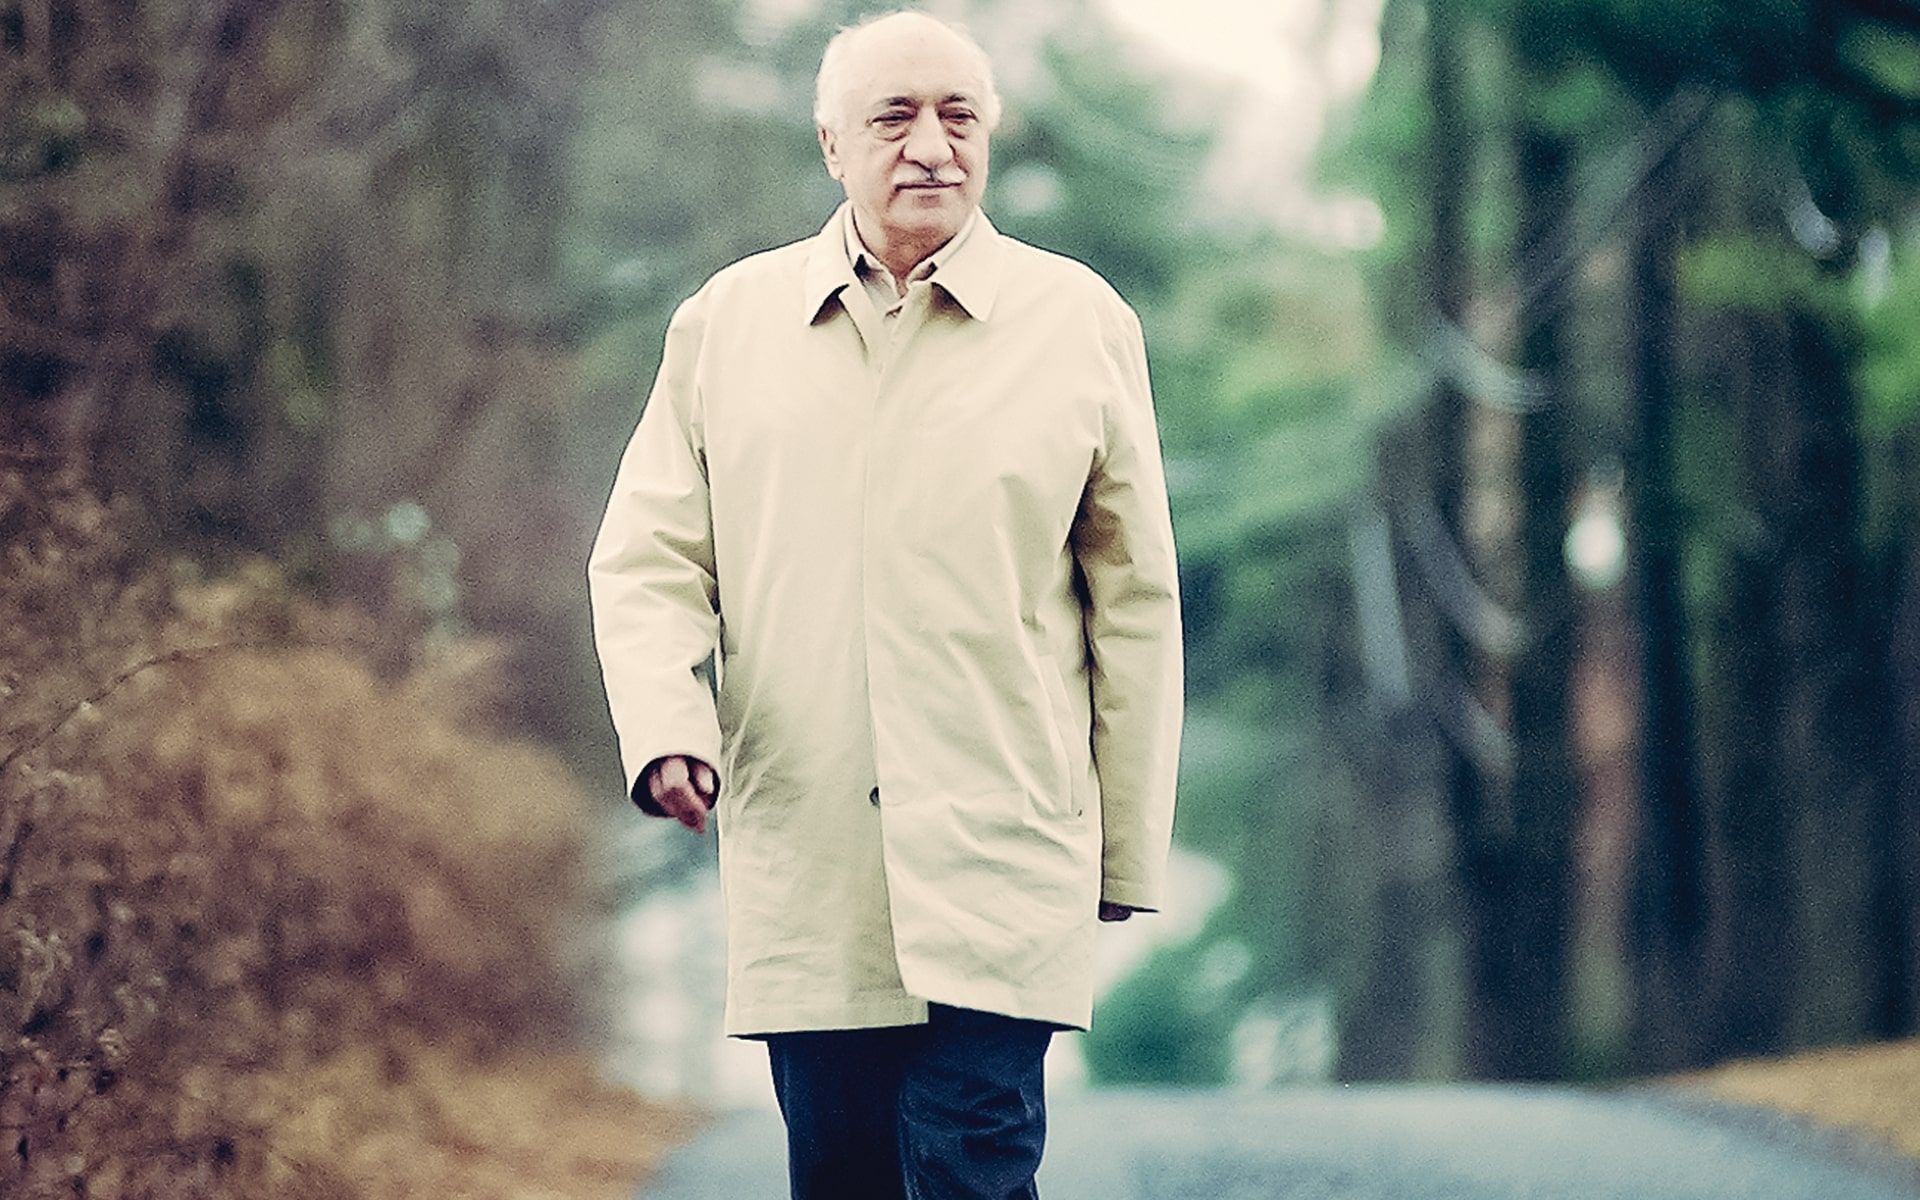 The Theological Dimension of the Thought of M. Fethullah Gülen (Part 2)